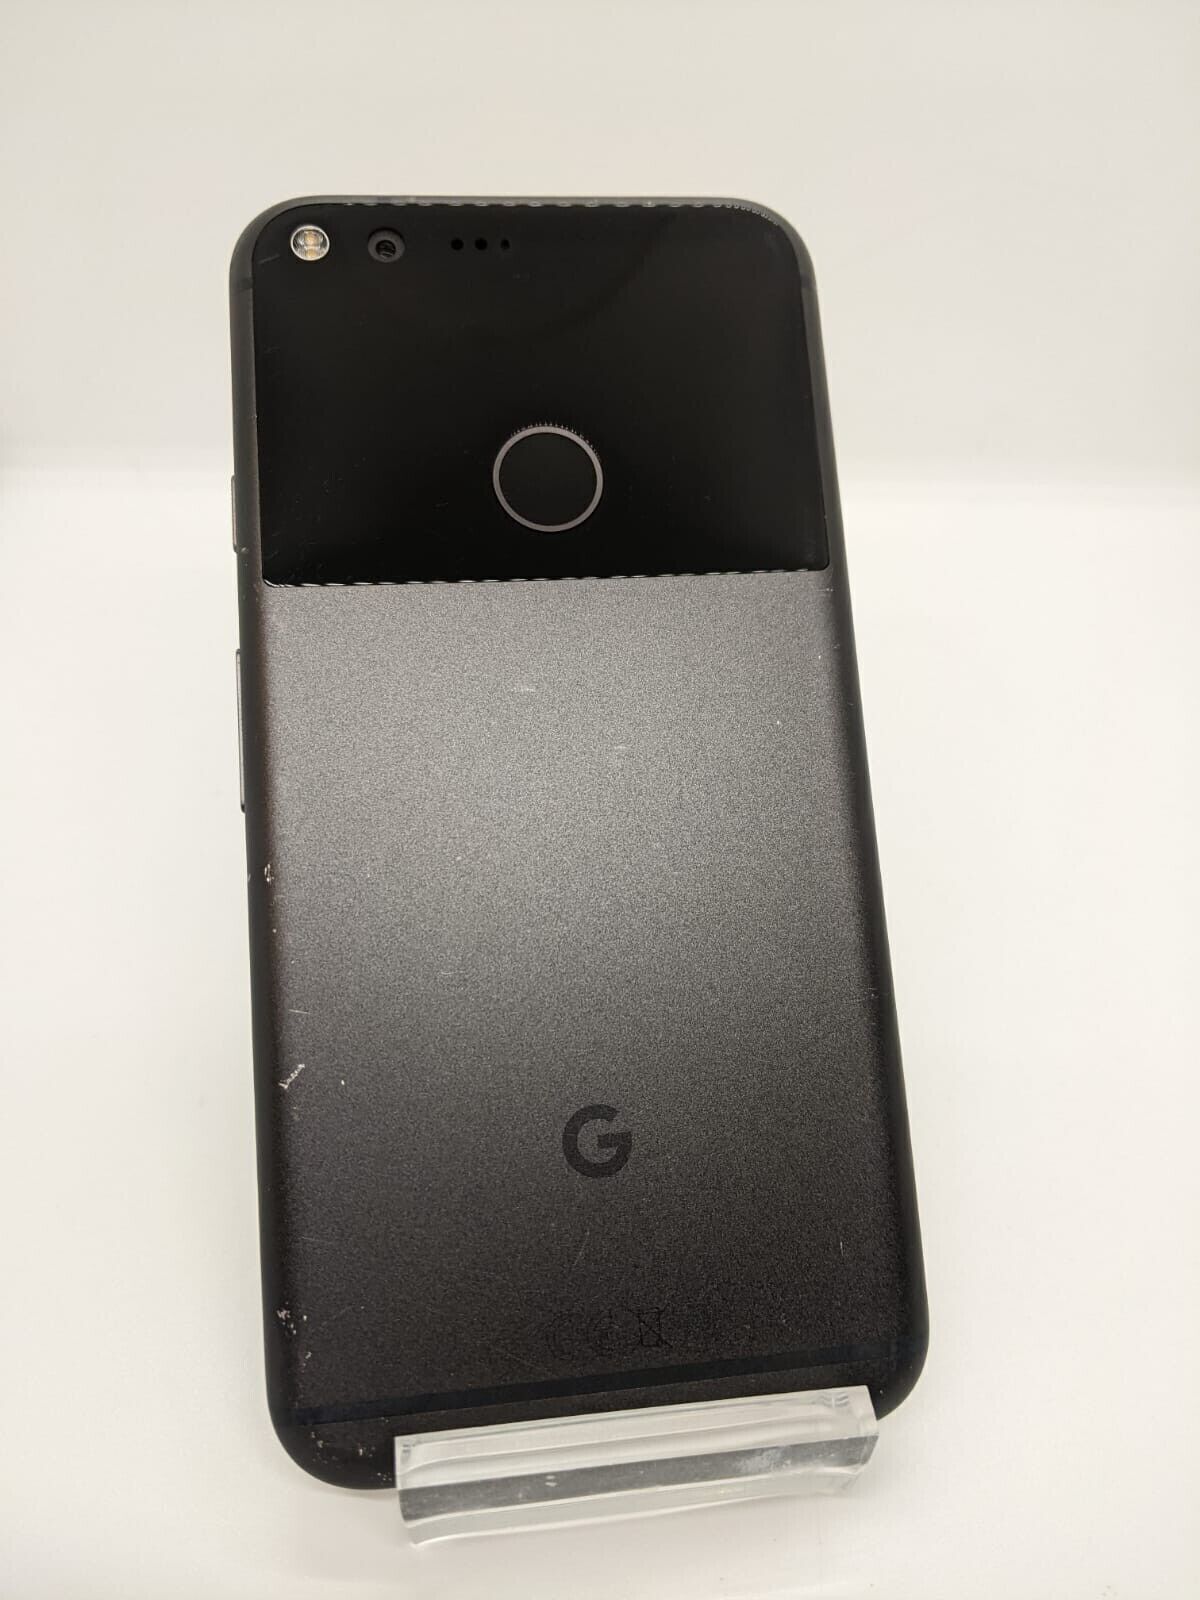 Google Pixel XL 128GB Unlocked Android 4G LTE Smartphone New Battery Installed!